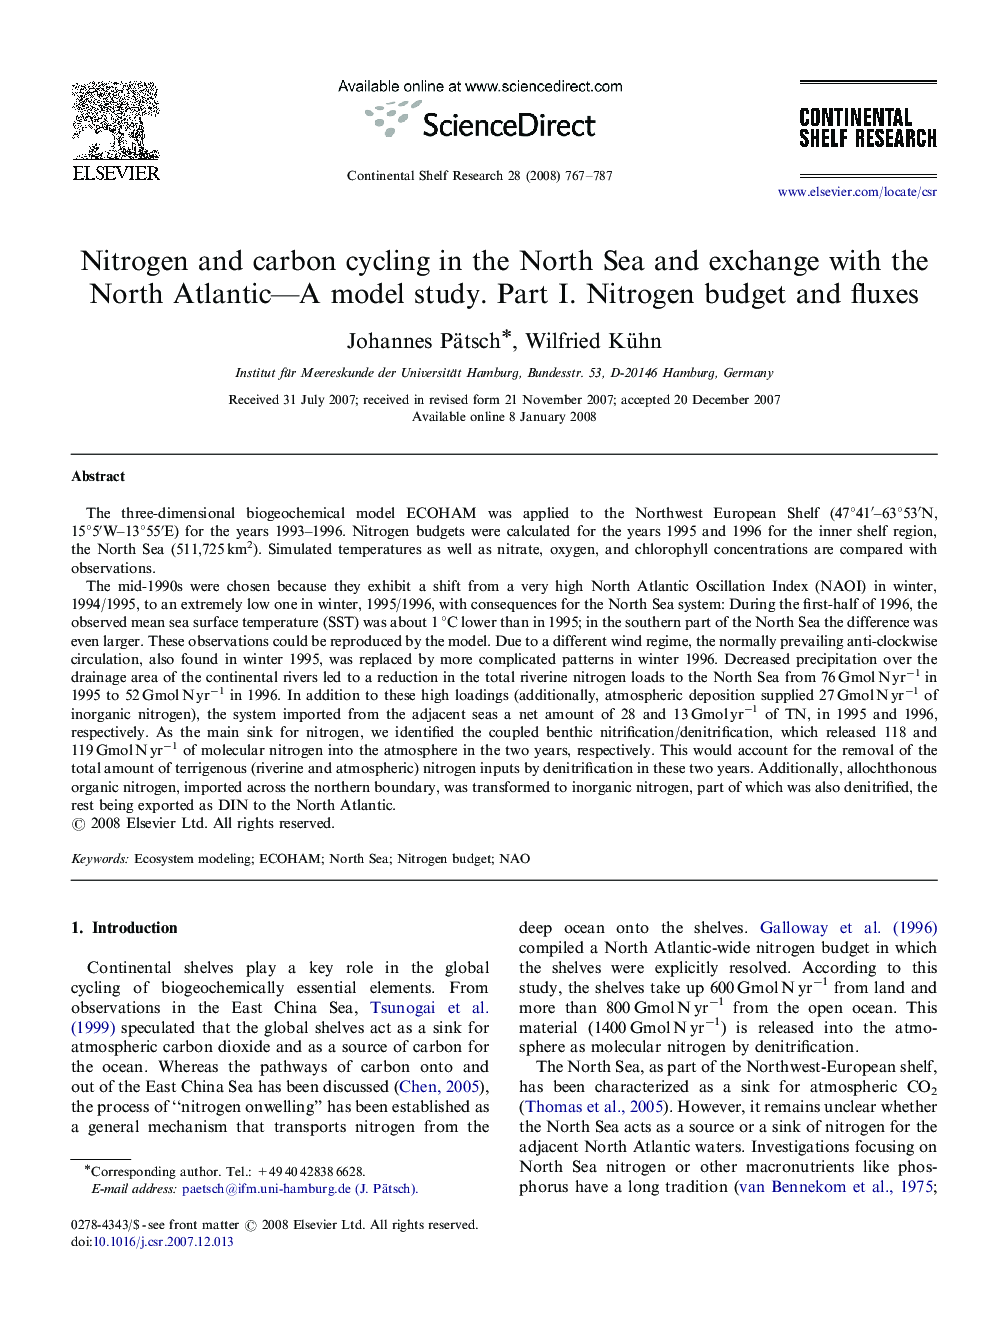 Nitrogen and carbon cycling in the North Sea and exchange with the North Atlantic—A model study. Part I. Nitrogen budget and fluxes